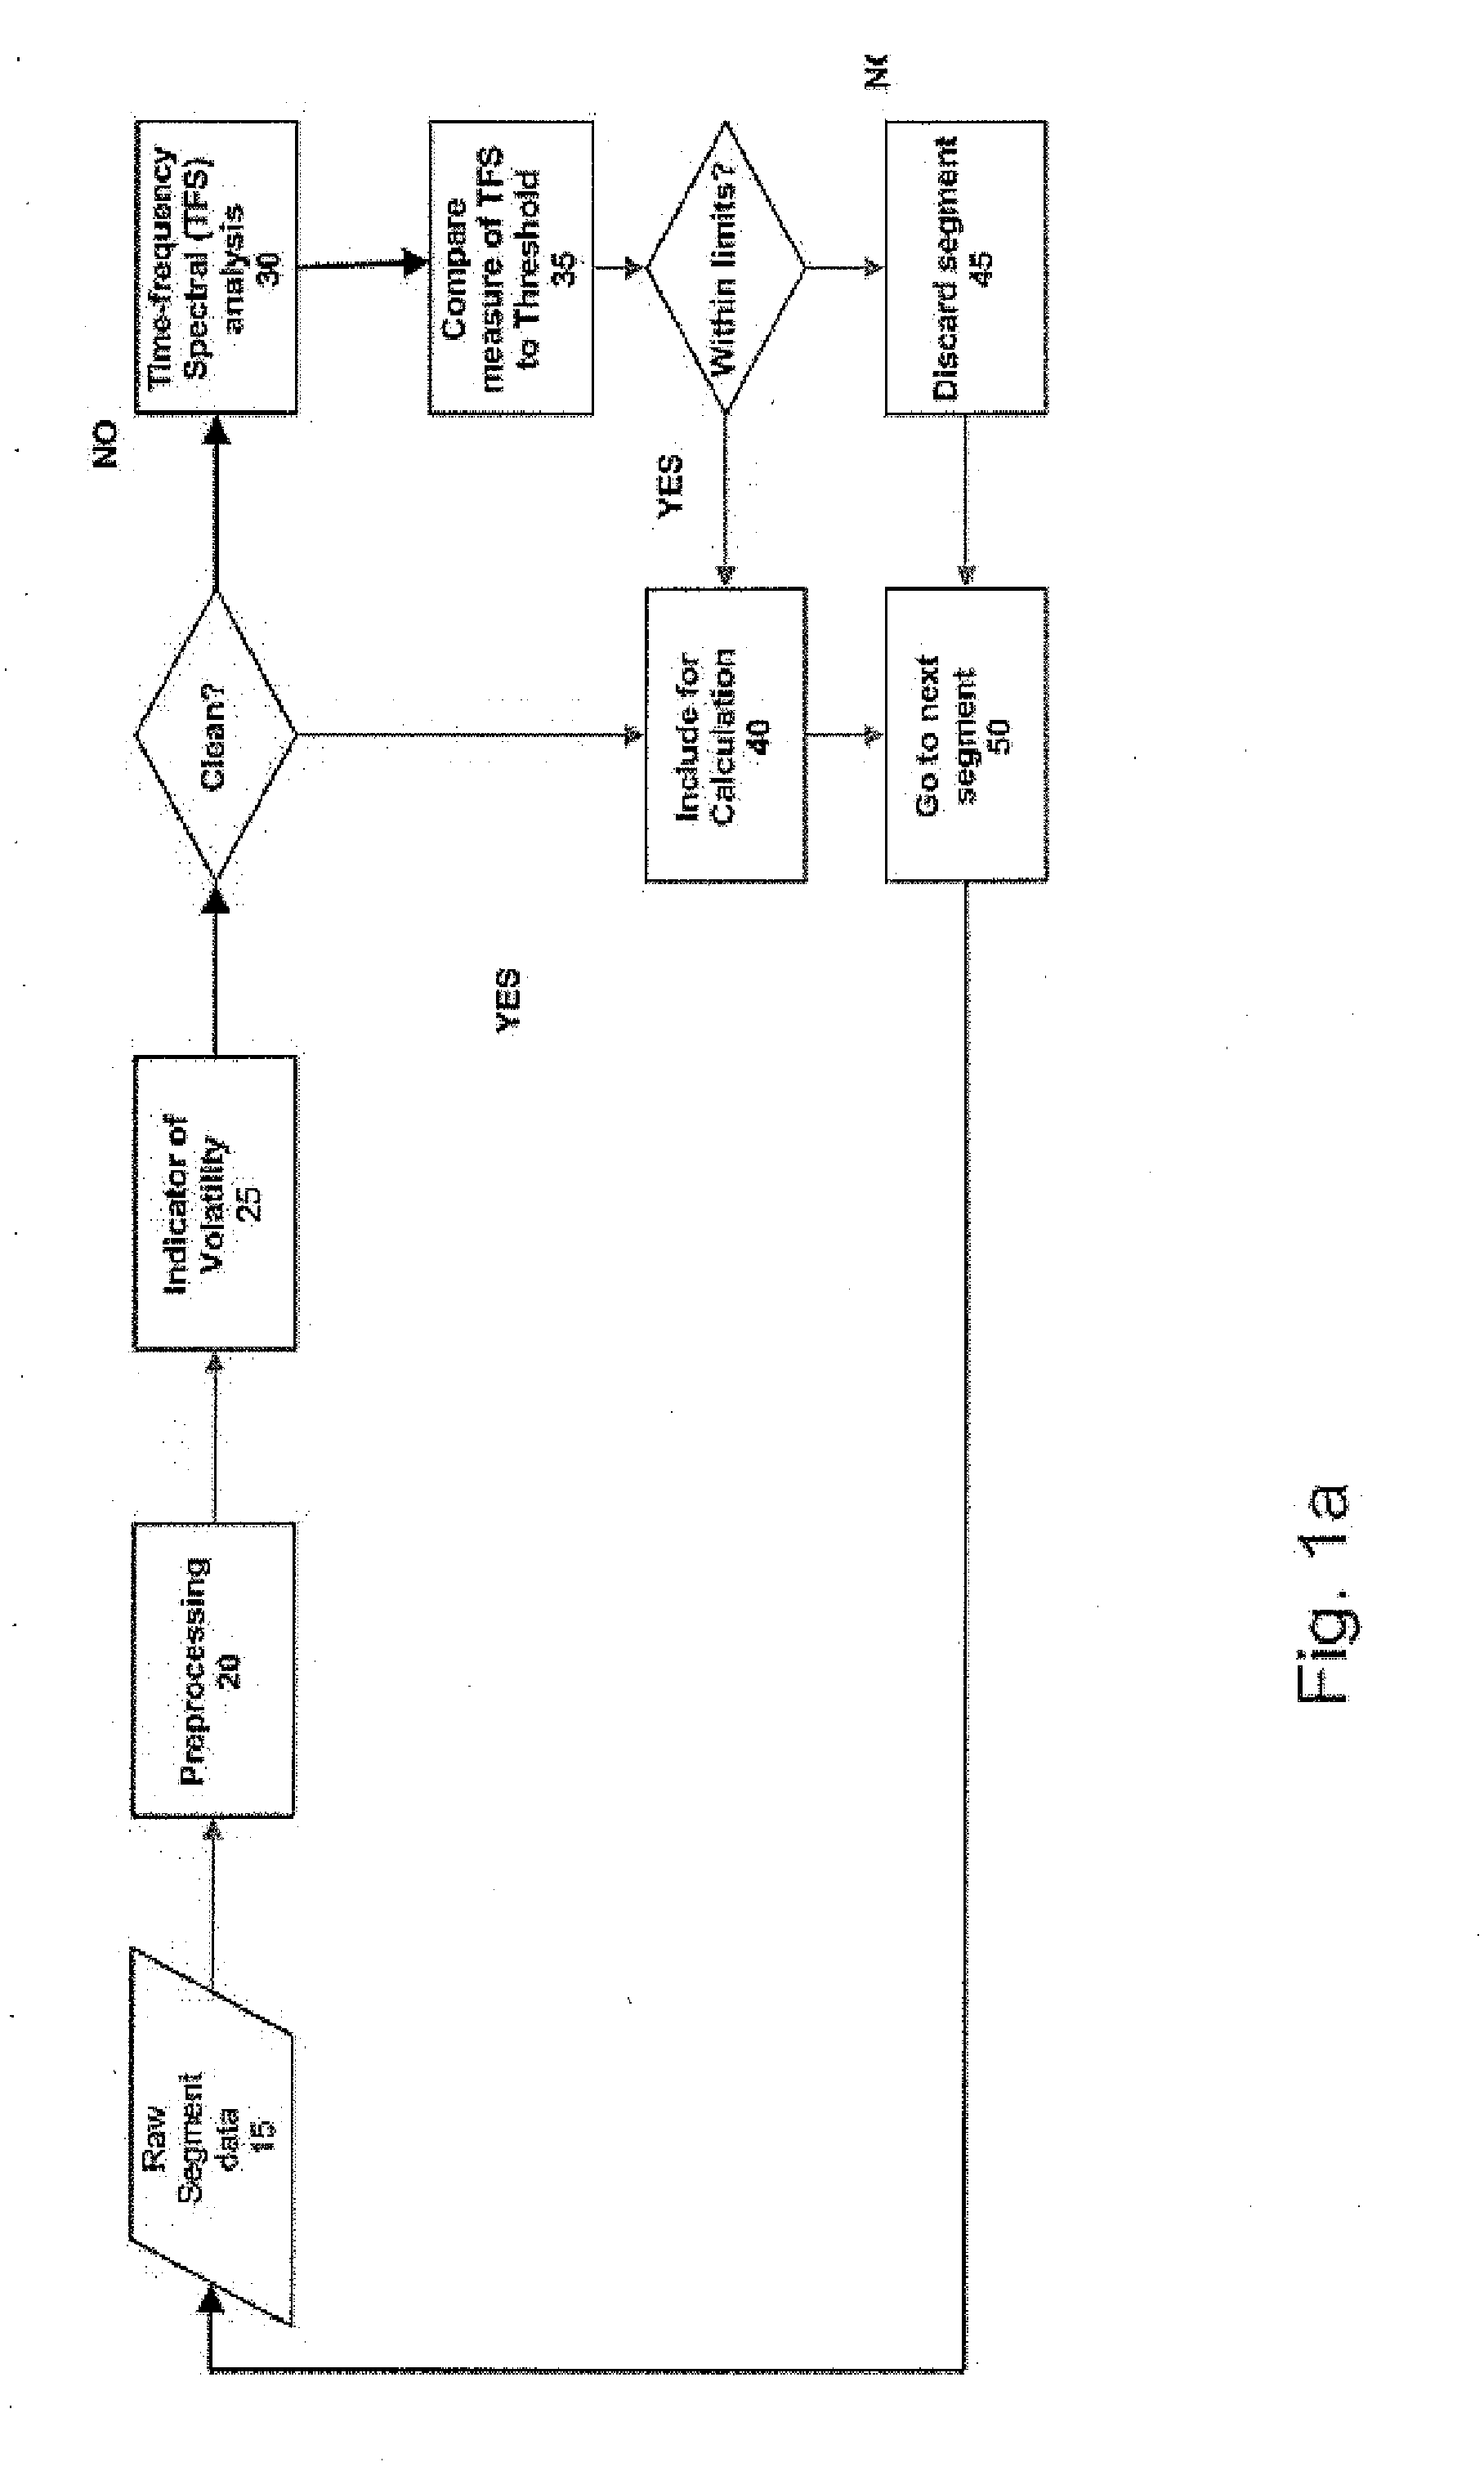 Method and system for detection and rejection of motion/noise artifacts in physiological measurements